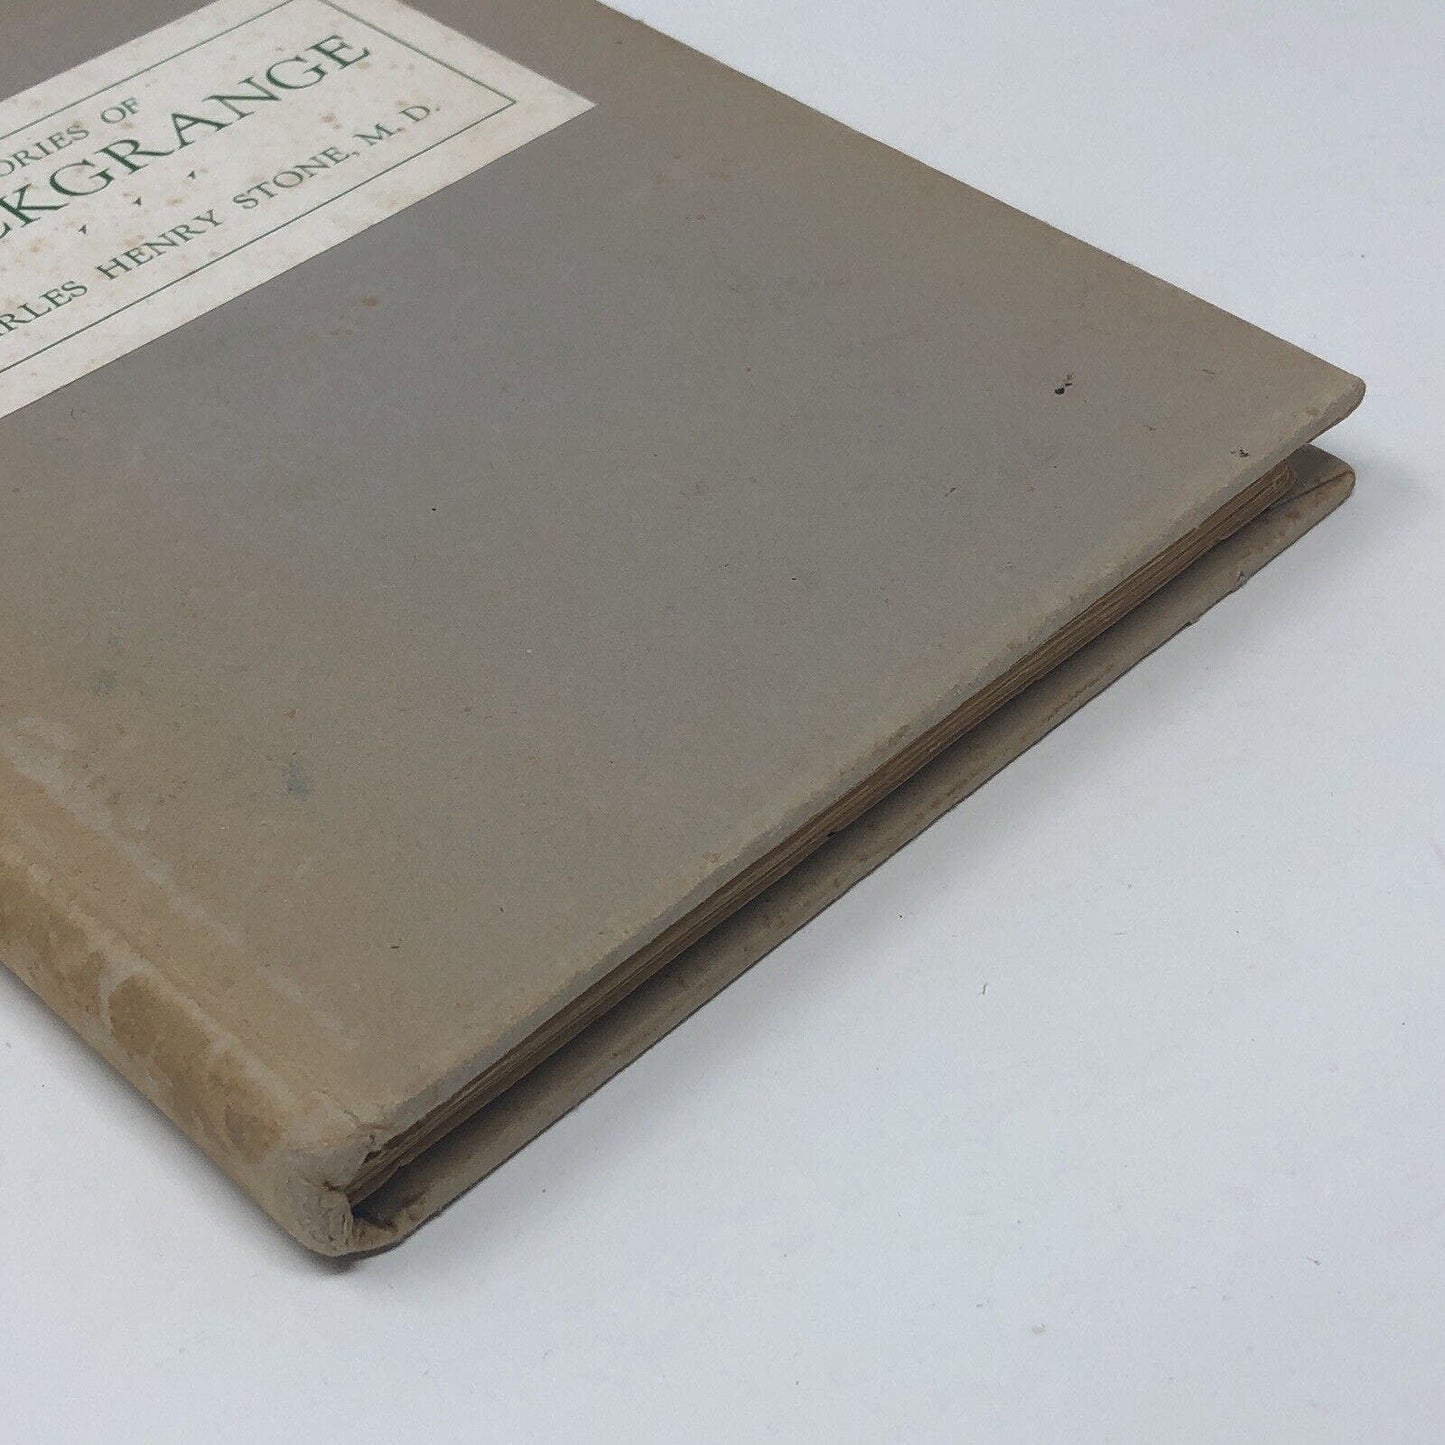 (Signed) Stories of Stockgrange by Charles Henry Stone MD ~ 1946 - Uncle Buddy's Beard & Used Books